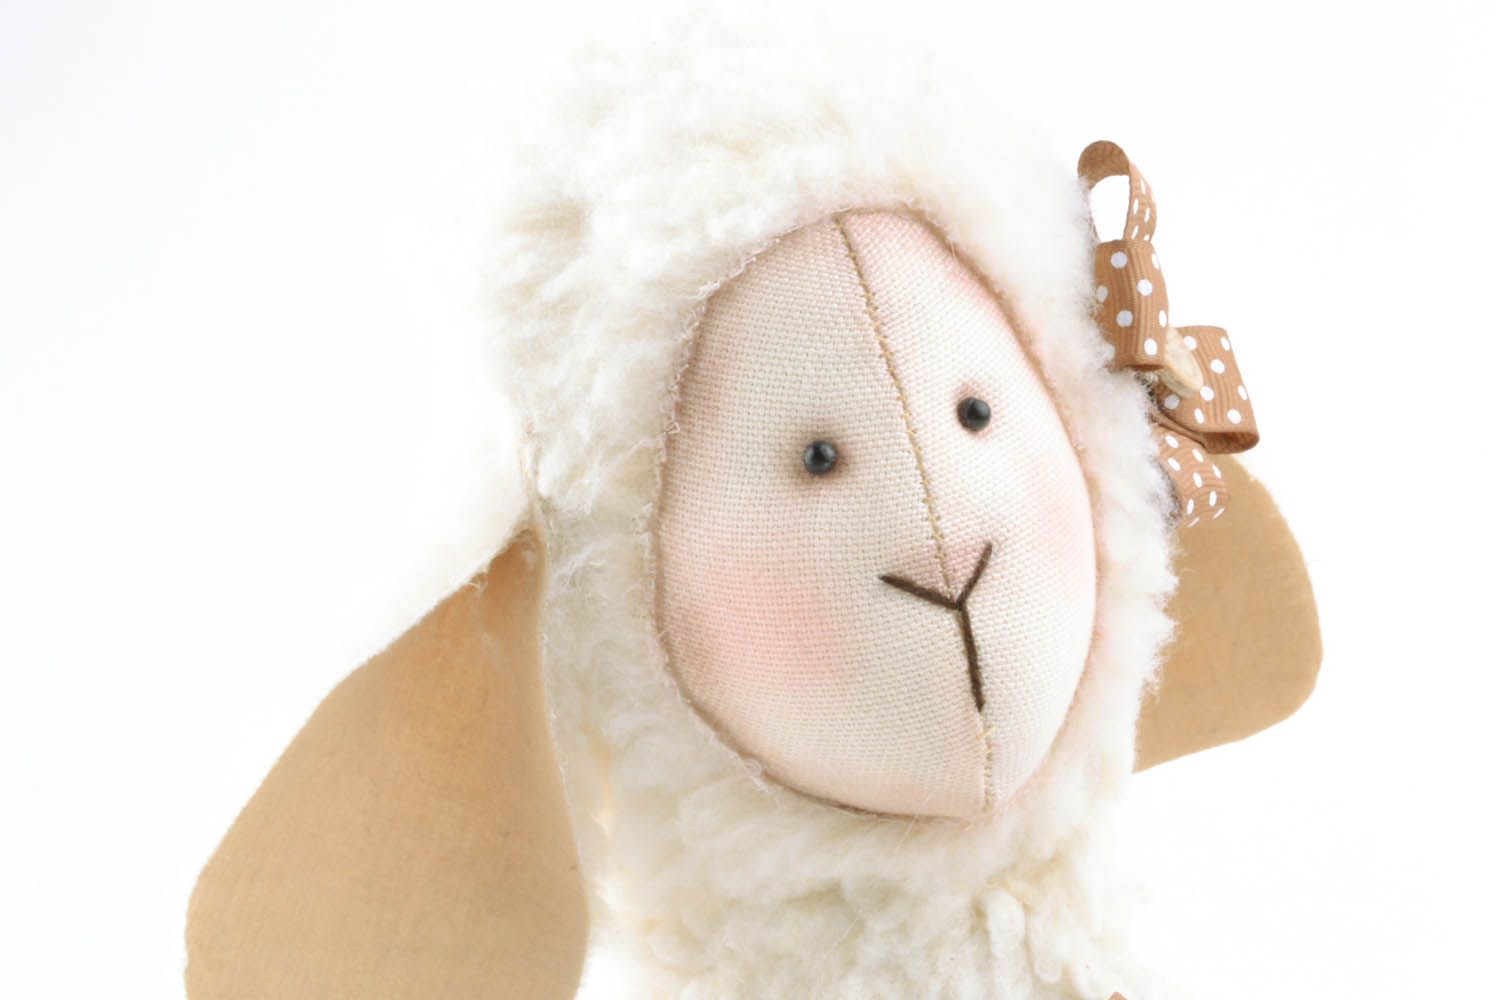 Handmade toy Sheep in a Dress photo 2